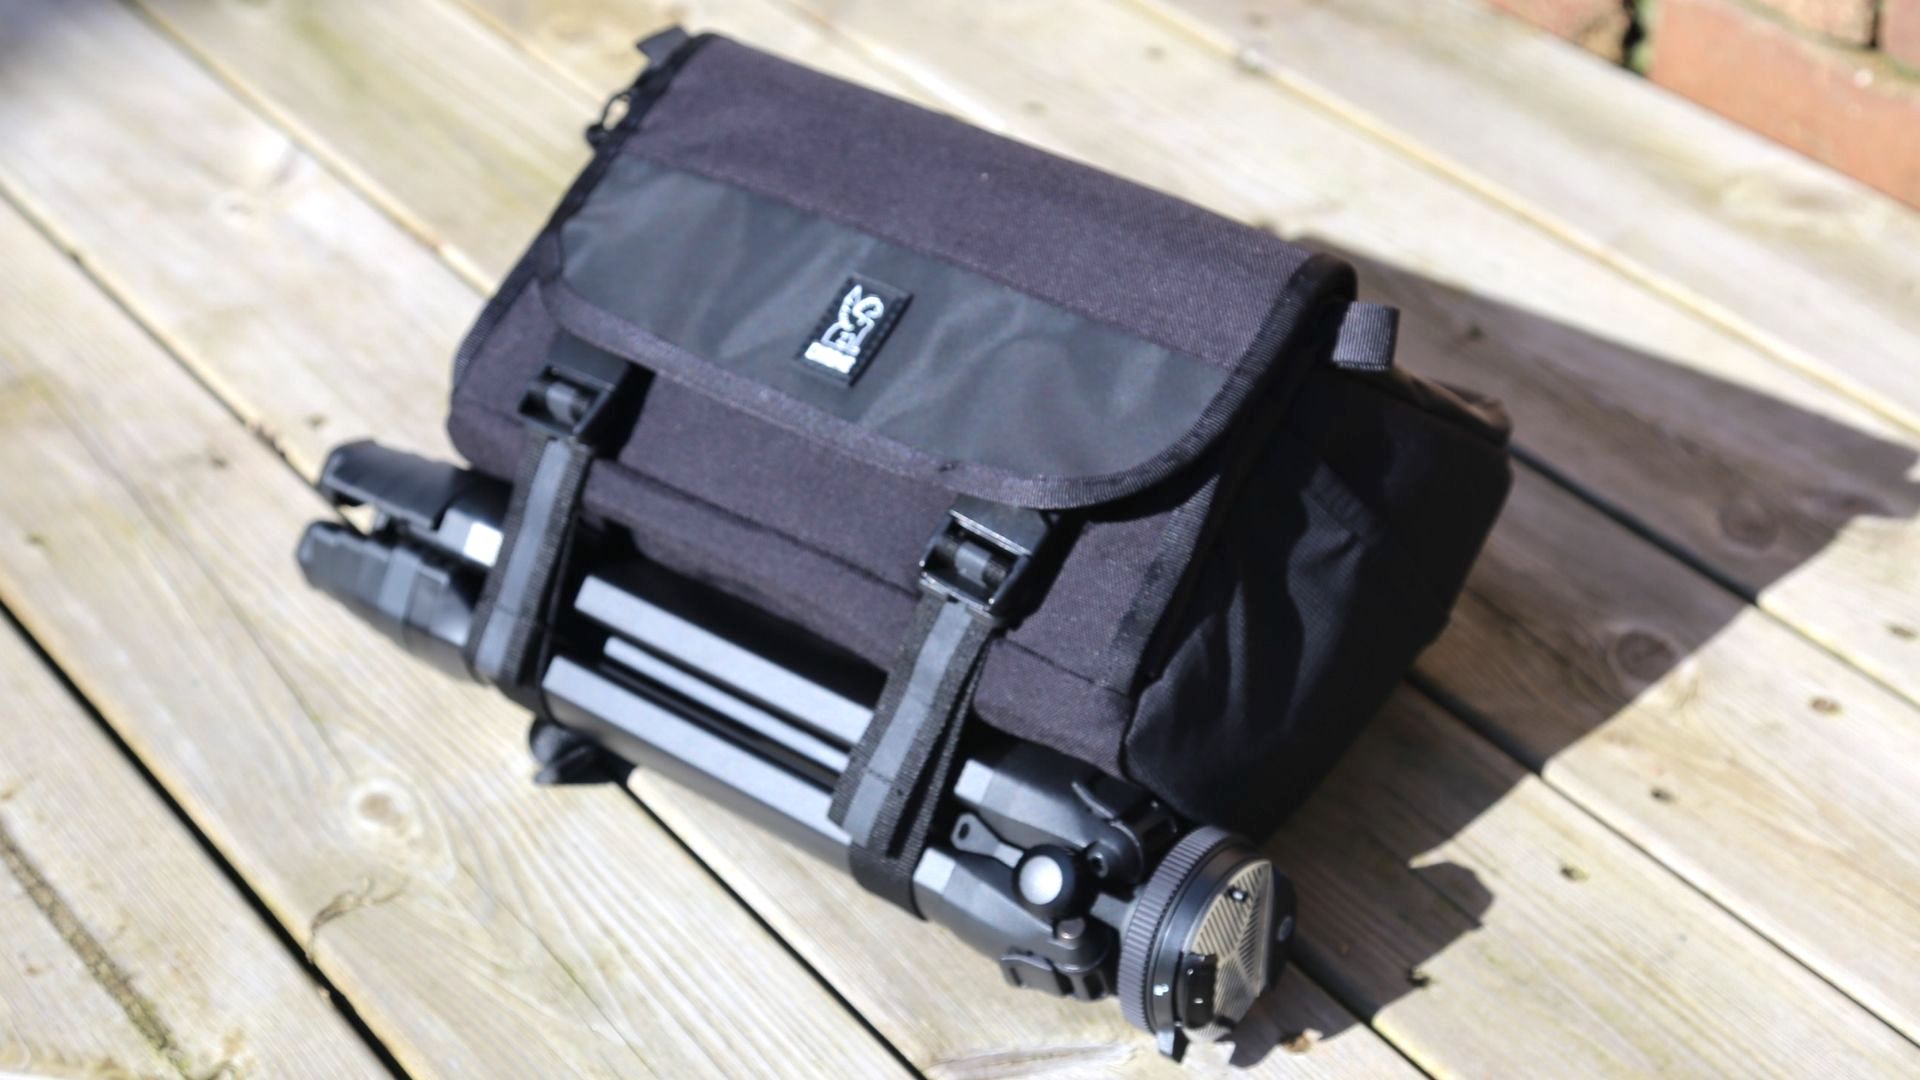 Best camera bags and cases: Chrome Niko 3.0 Camera Sling